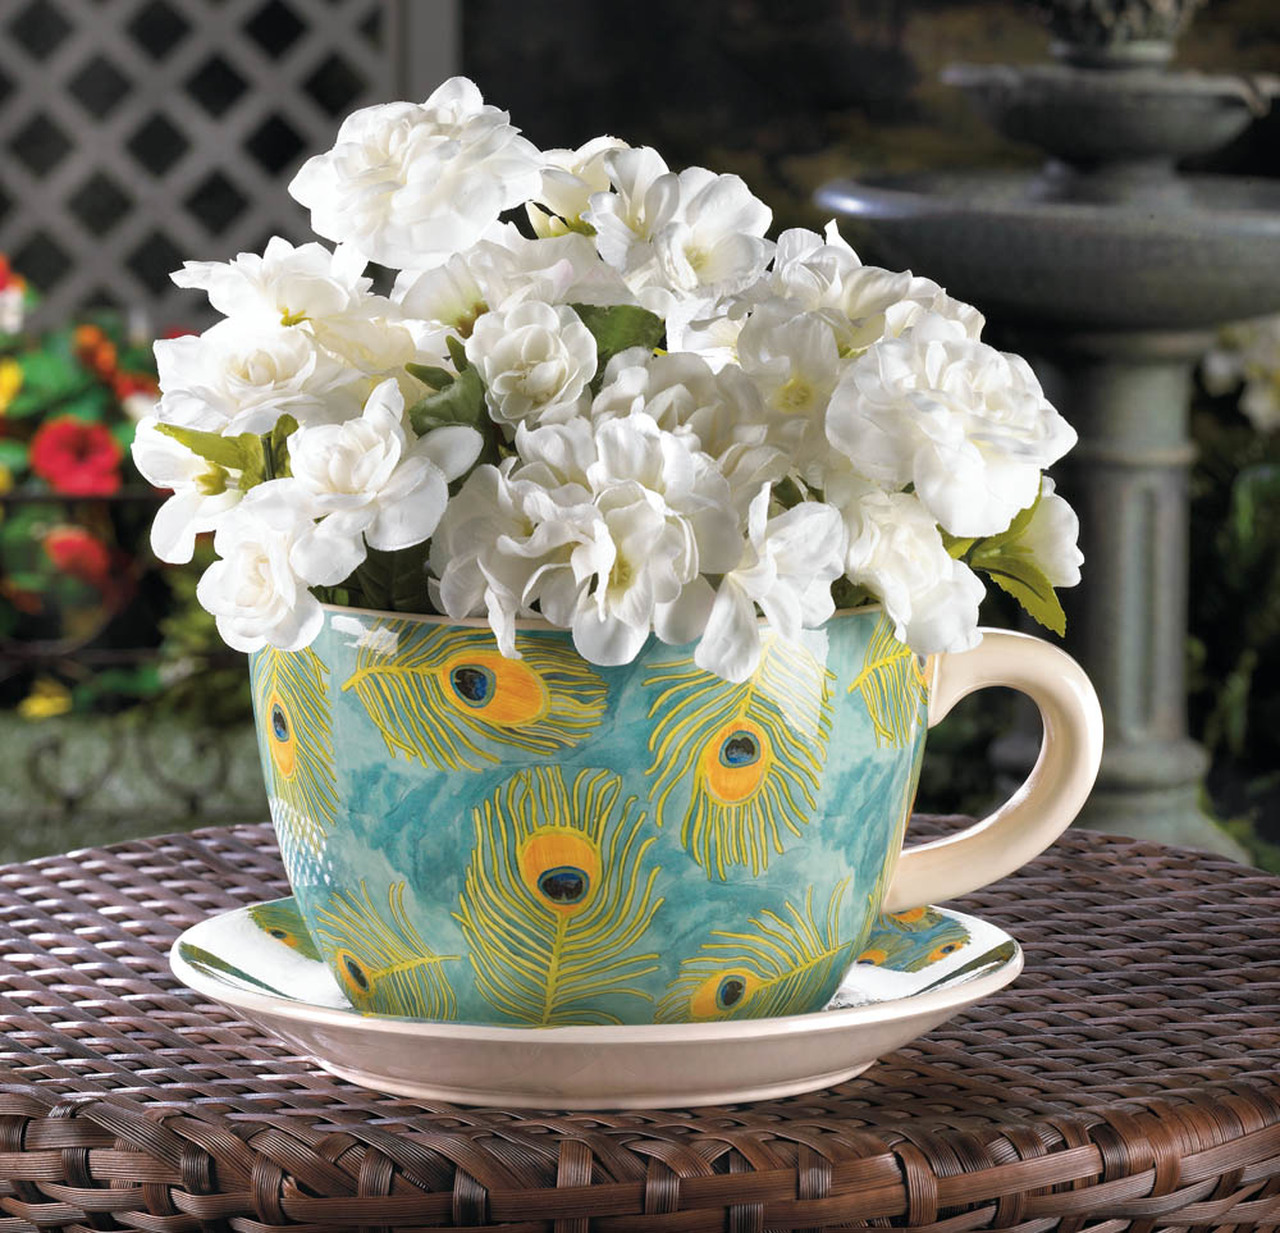 Peacock Feather Dolomite Tea Cup Planter - 4.5 inches